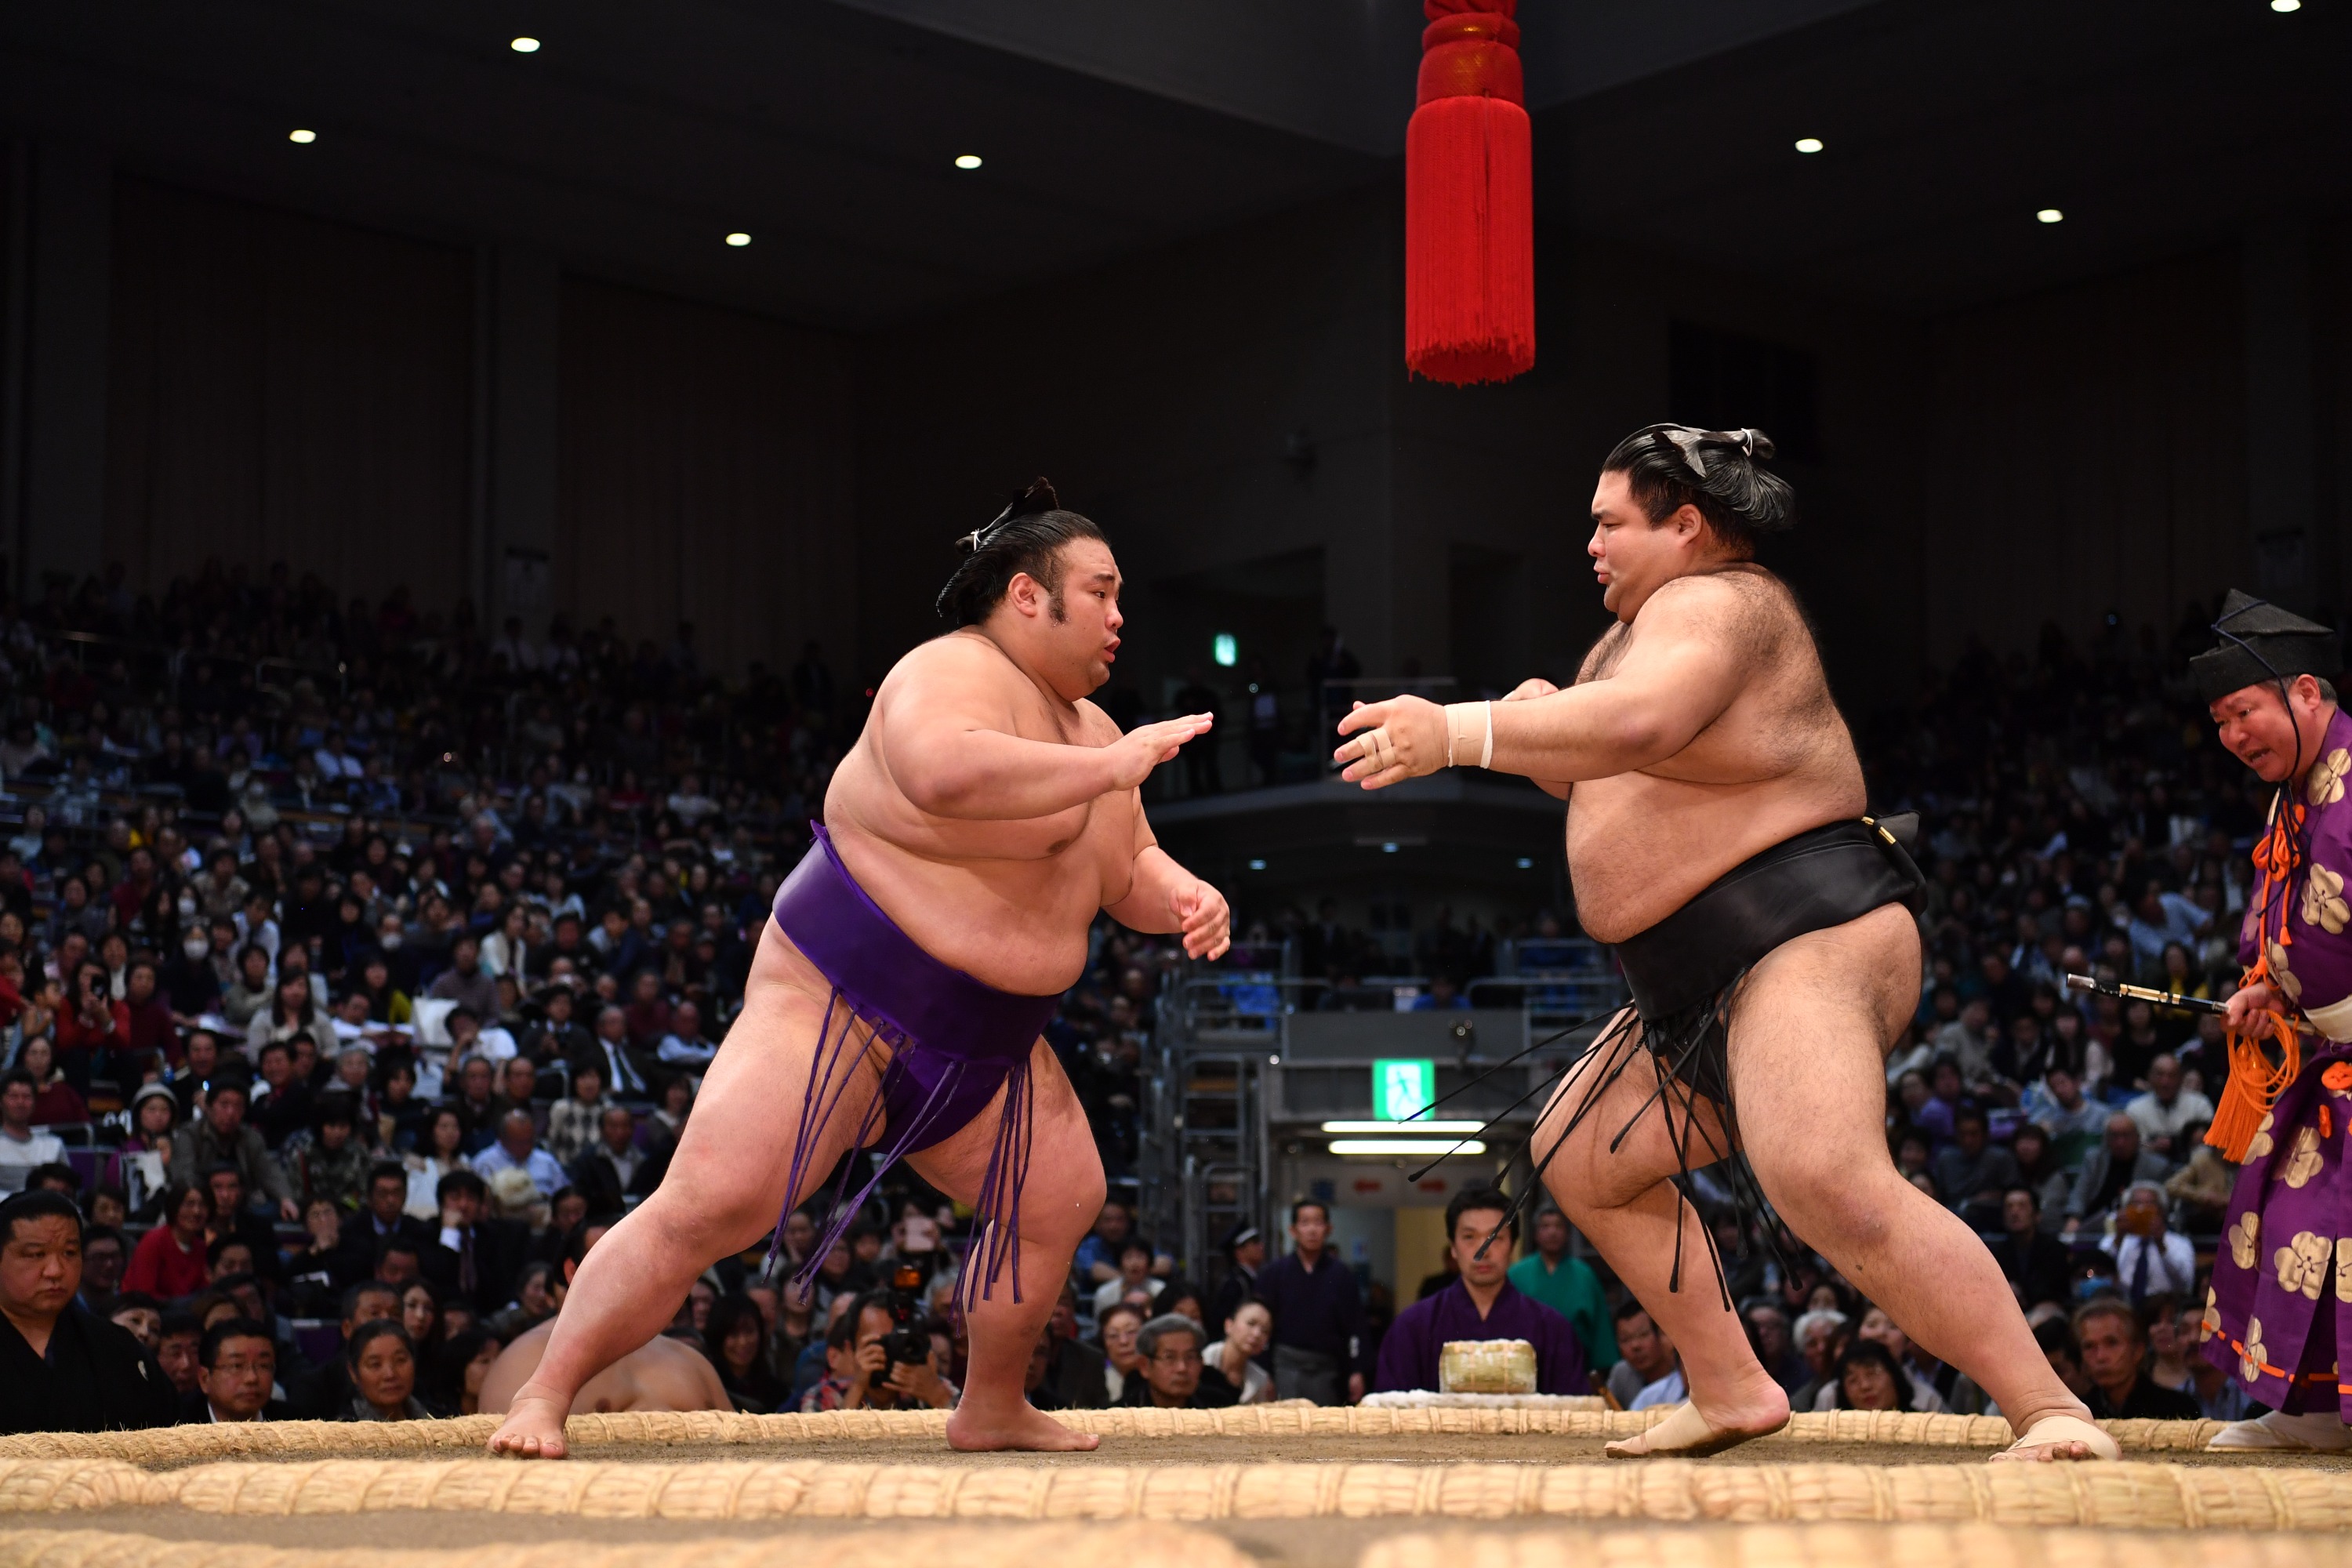 [Osaka] Grand Sumo Tournament (Mass seats for two) and Pufferfish lunch